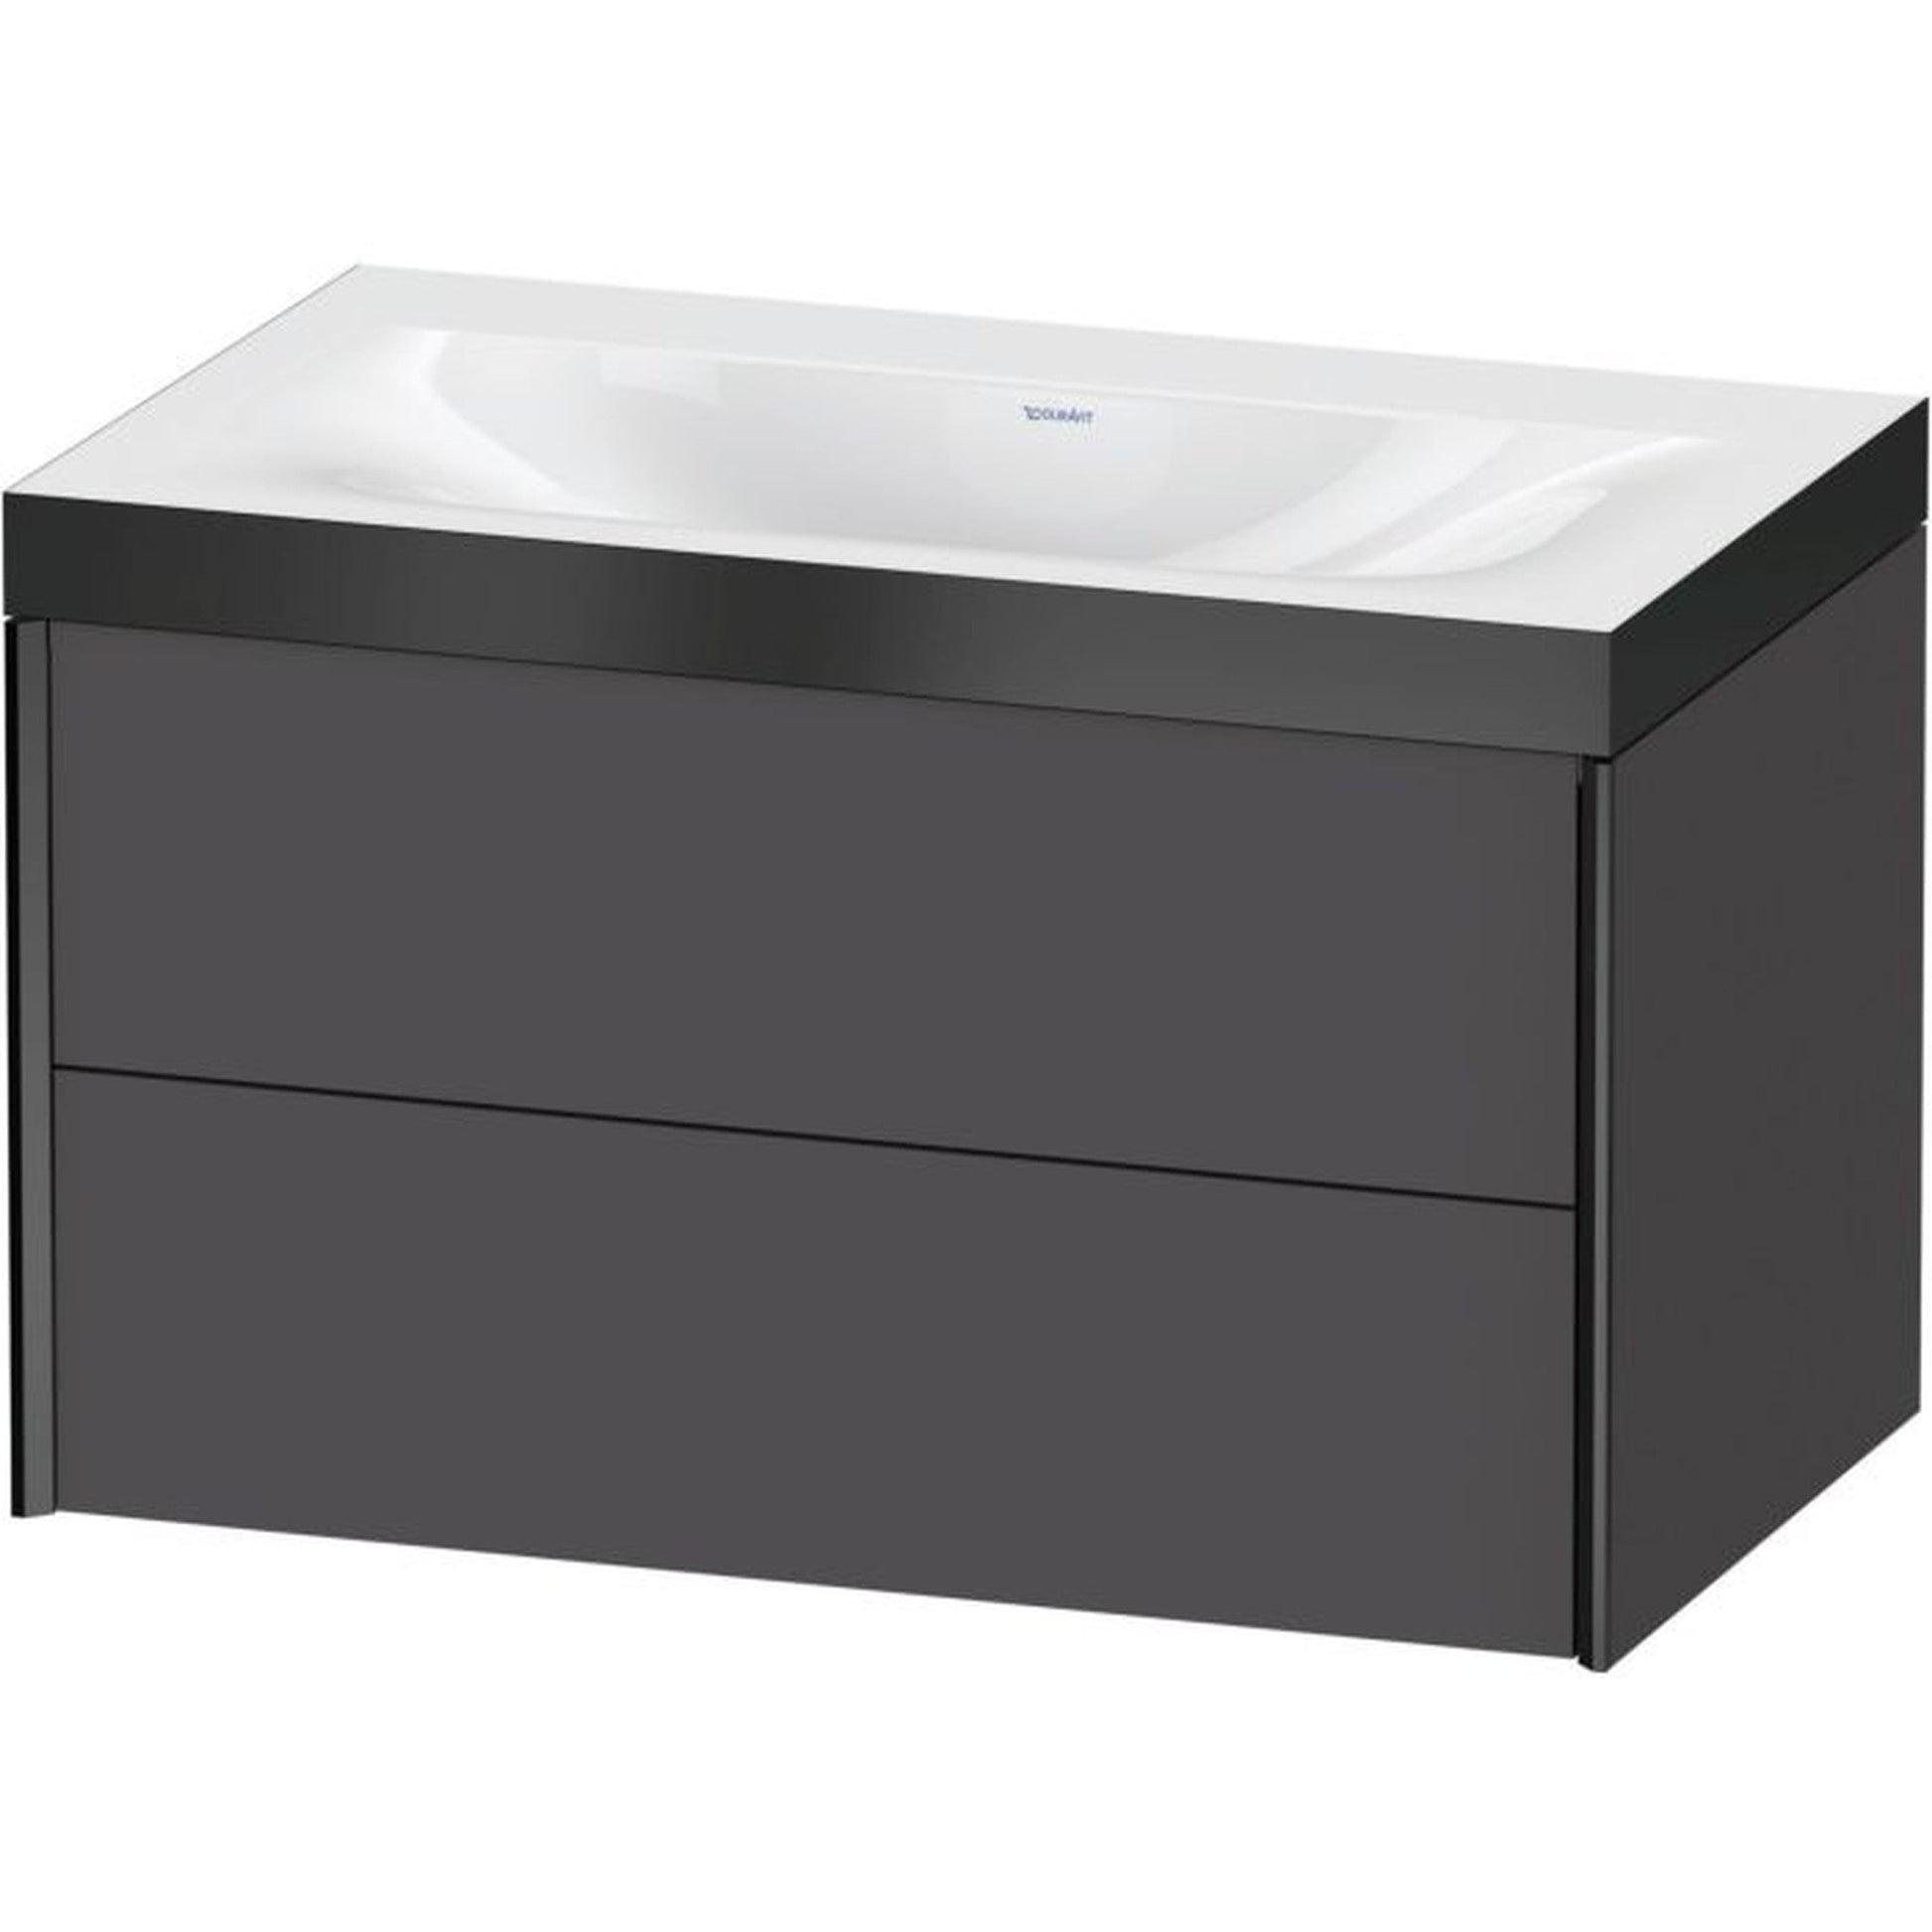 Duravit Xviu 31" x 20" x 19" Two Drawer C-Bonded Wall-Mount Vanity Kit Without Tap Hole, Graphite (XV4615NB249P)